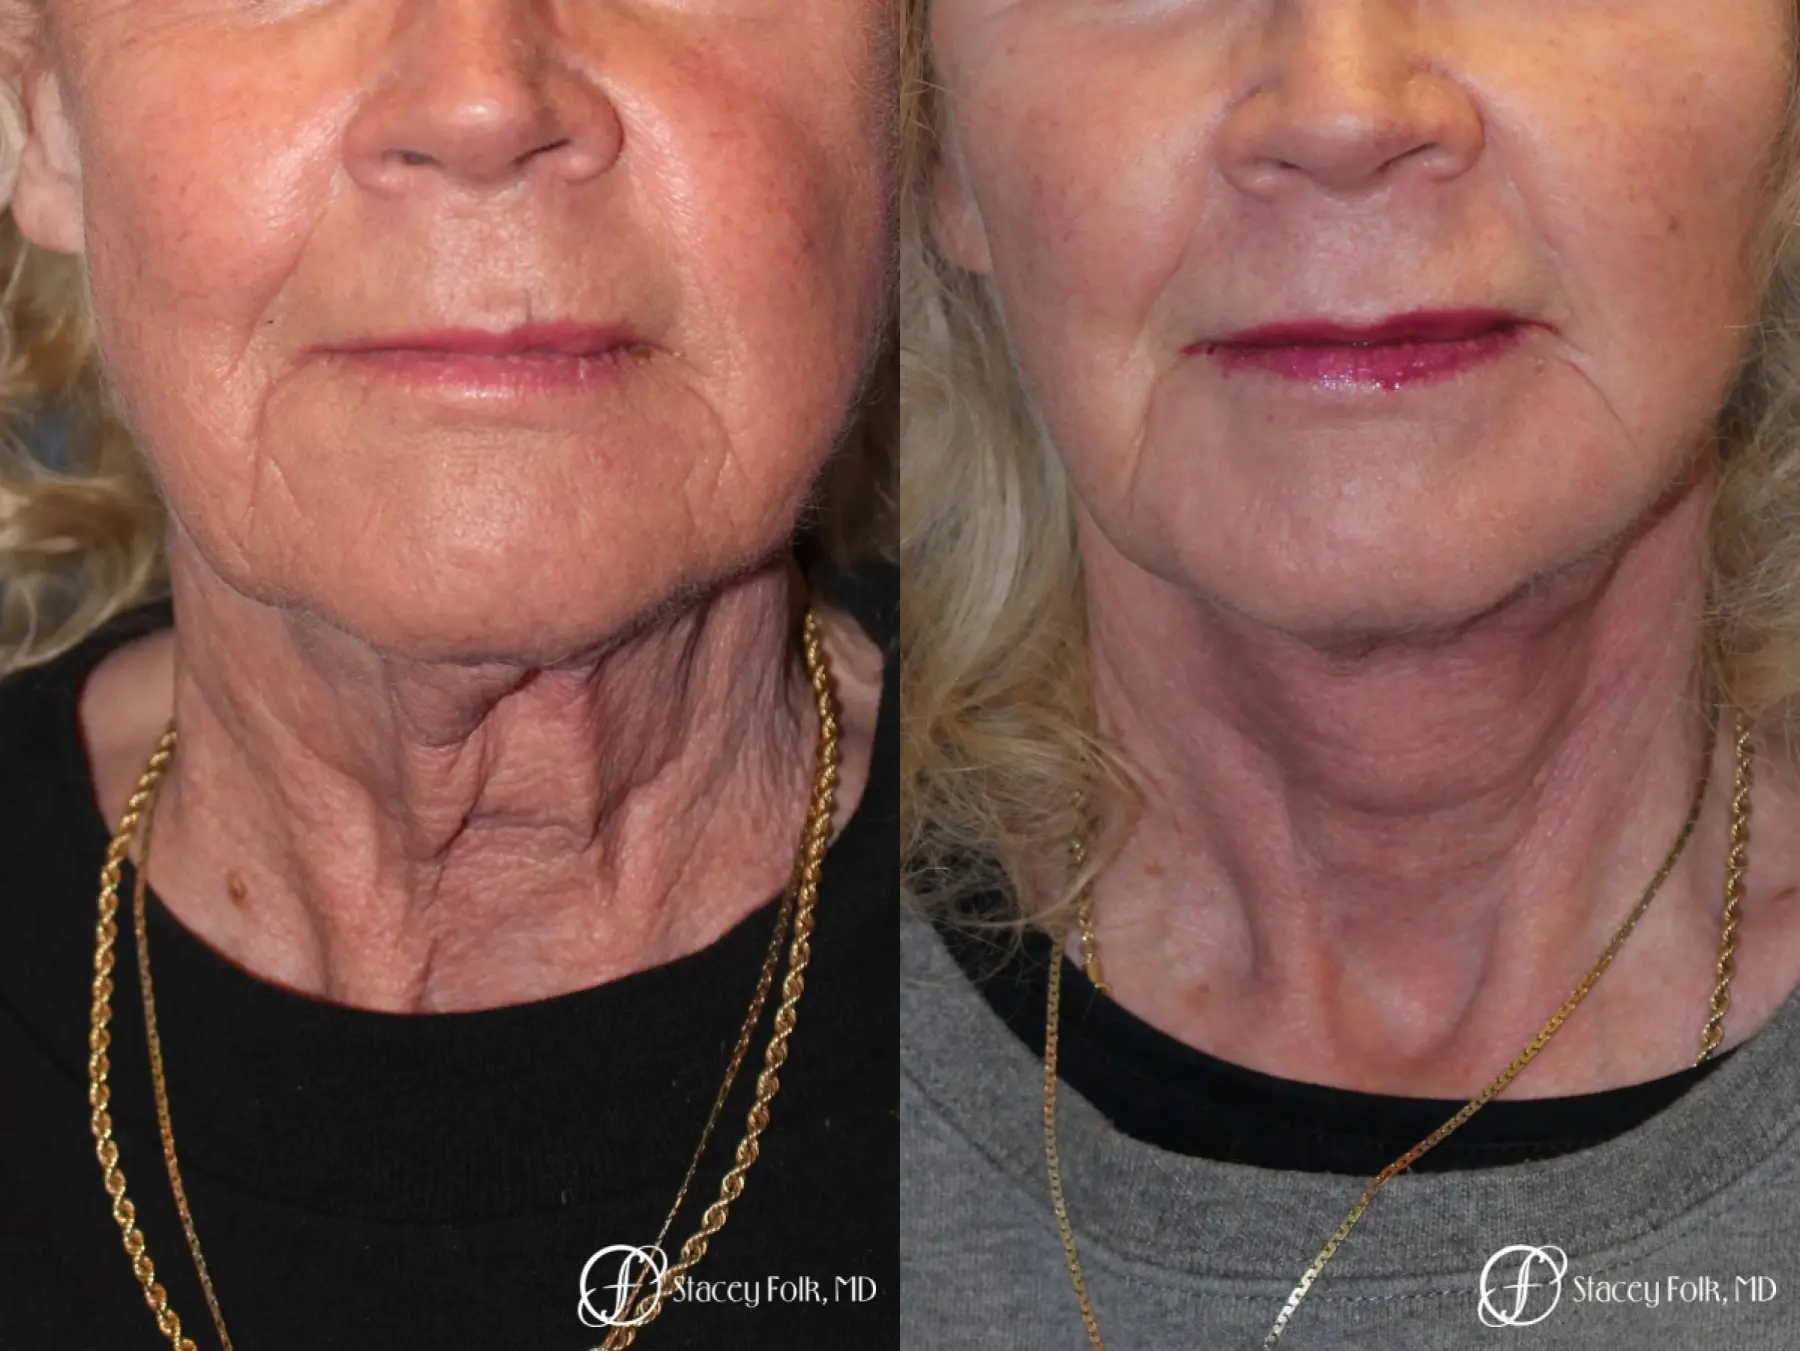 Denver Facial Rejuvenation Face lift, Fat Injections, and Laser Resurfacing 7131 - Before and After 3